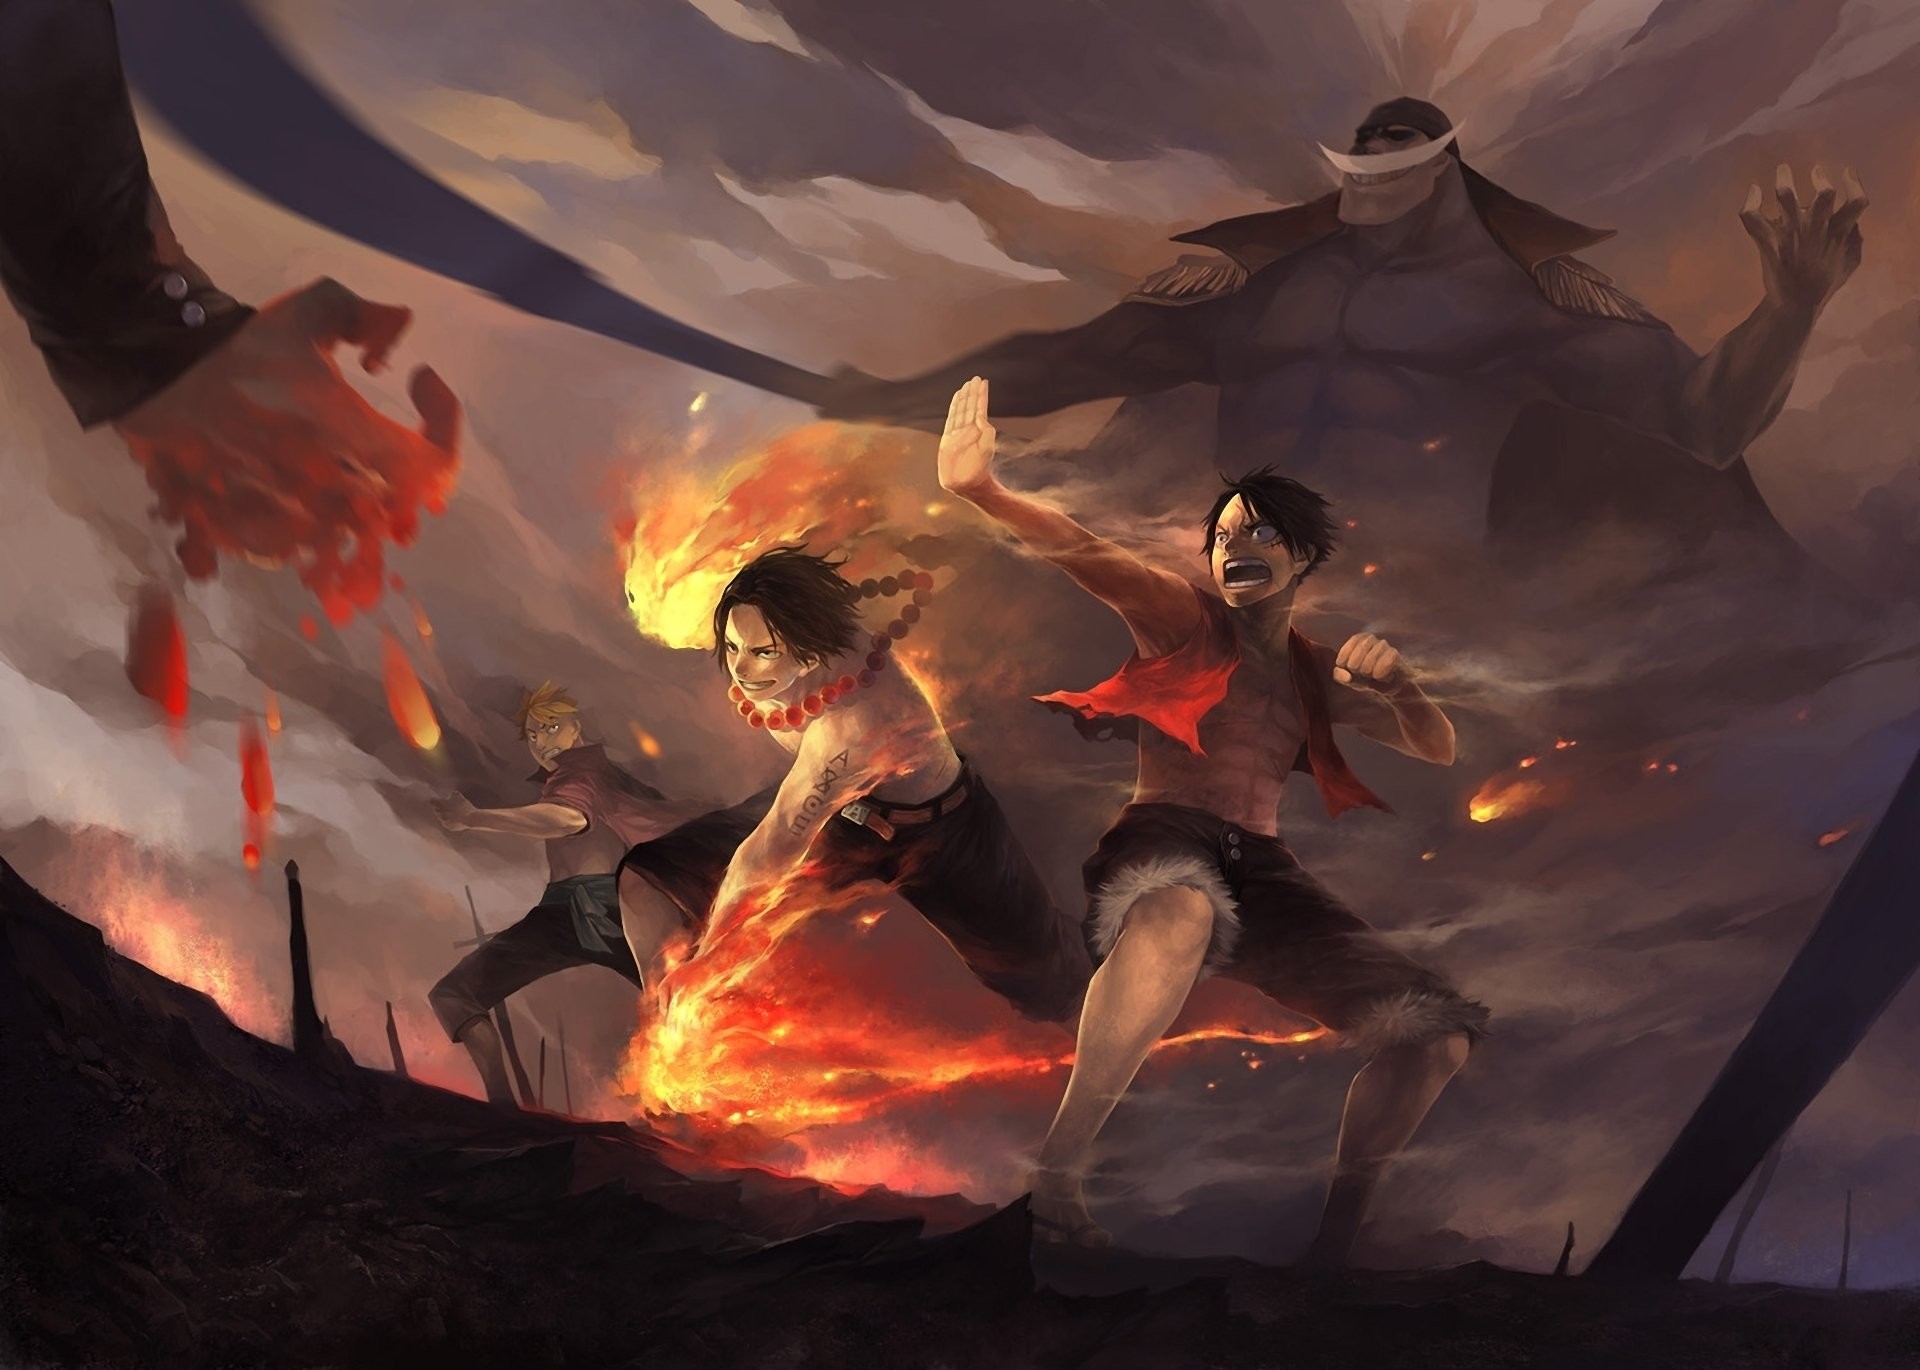 Wallpaper ID 476814  Anime One Piece Phone Wallpaper Edward Newgate  Marco One Piece Portgas D Ace Monkey D Luffy 720x1280 free download